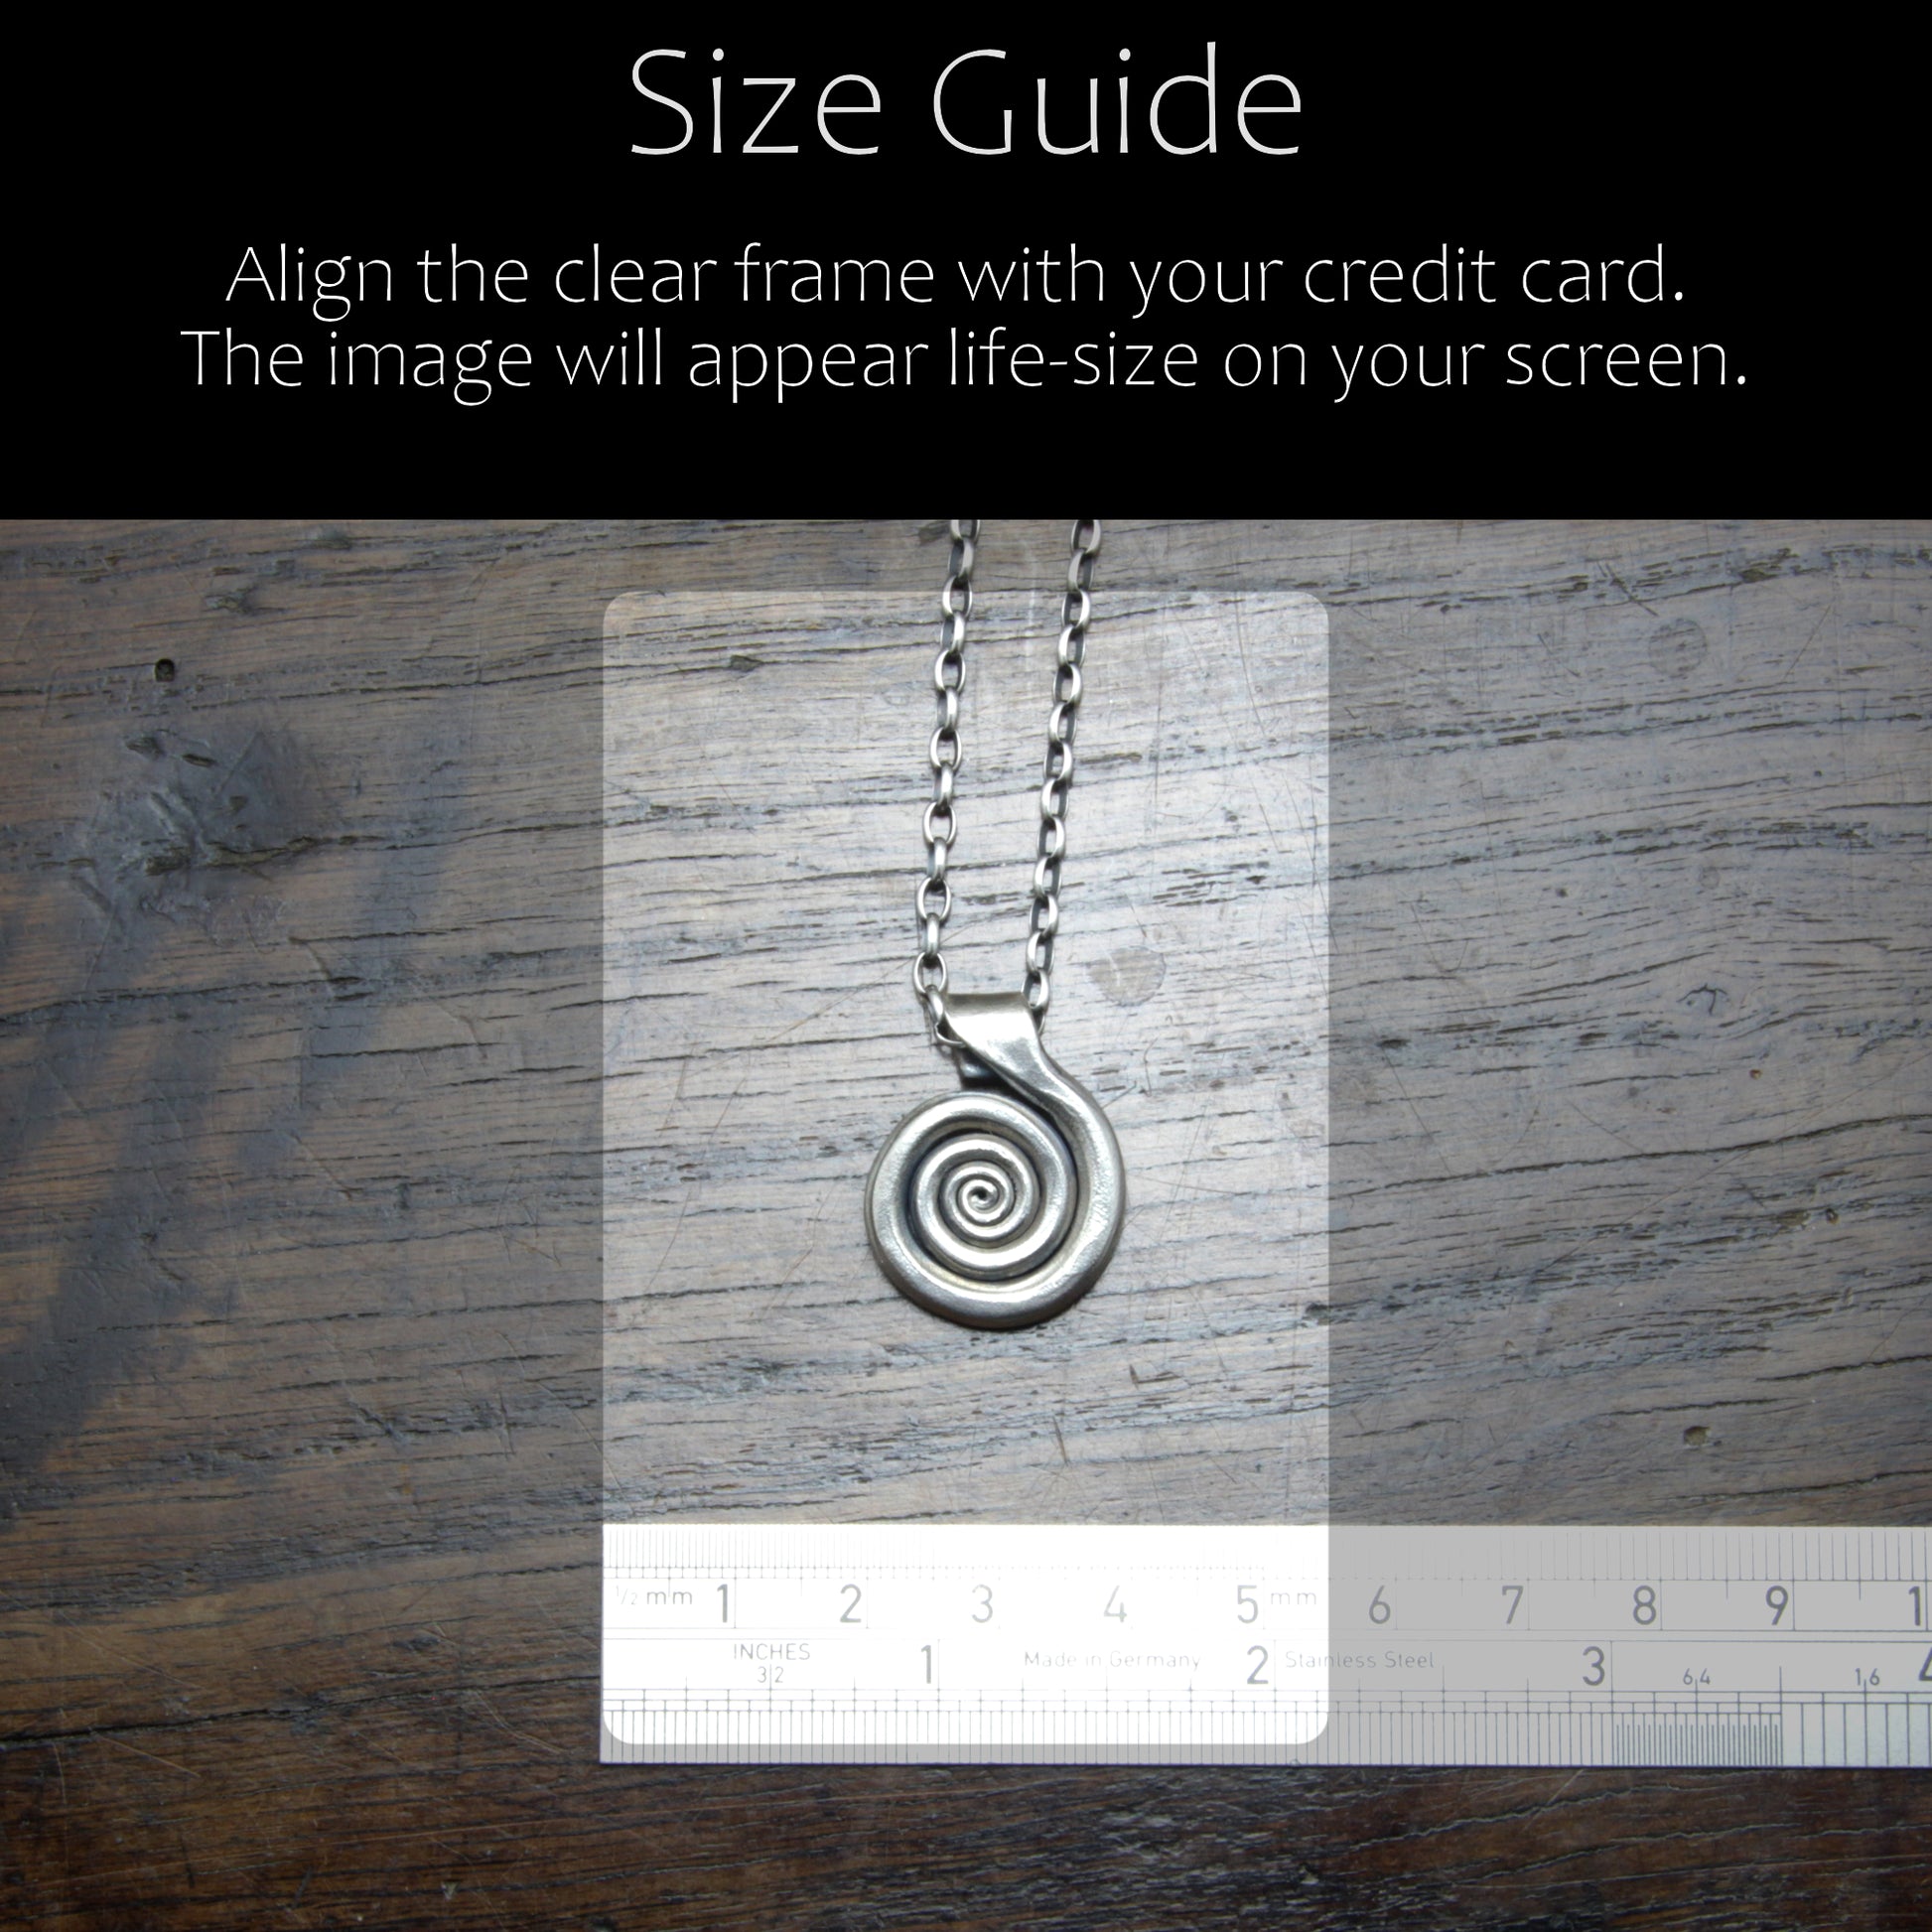 Size Guide. Align the clear frame with your credit card.  The image will appear life-size on your screen.